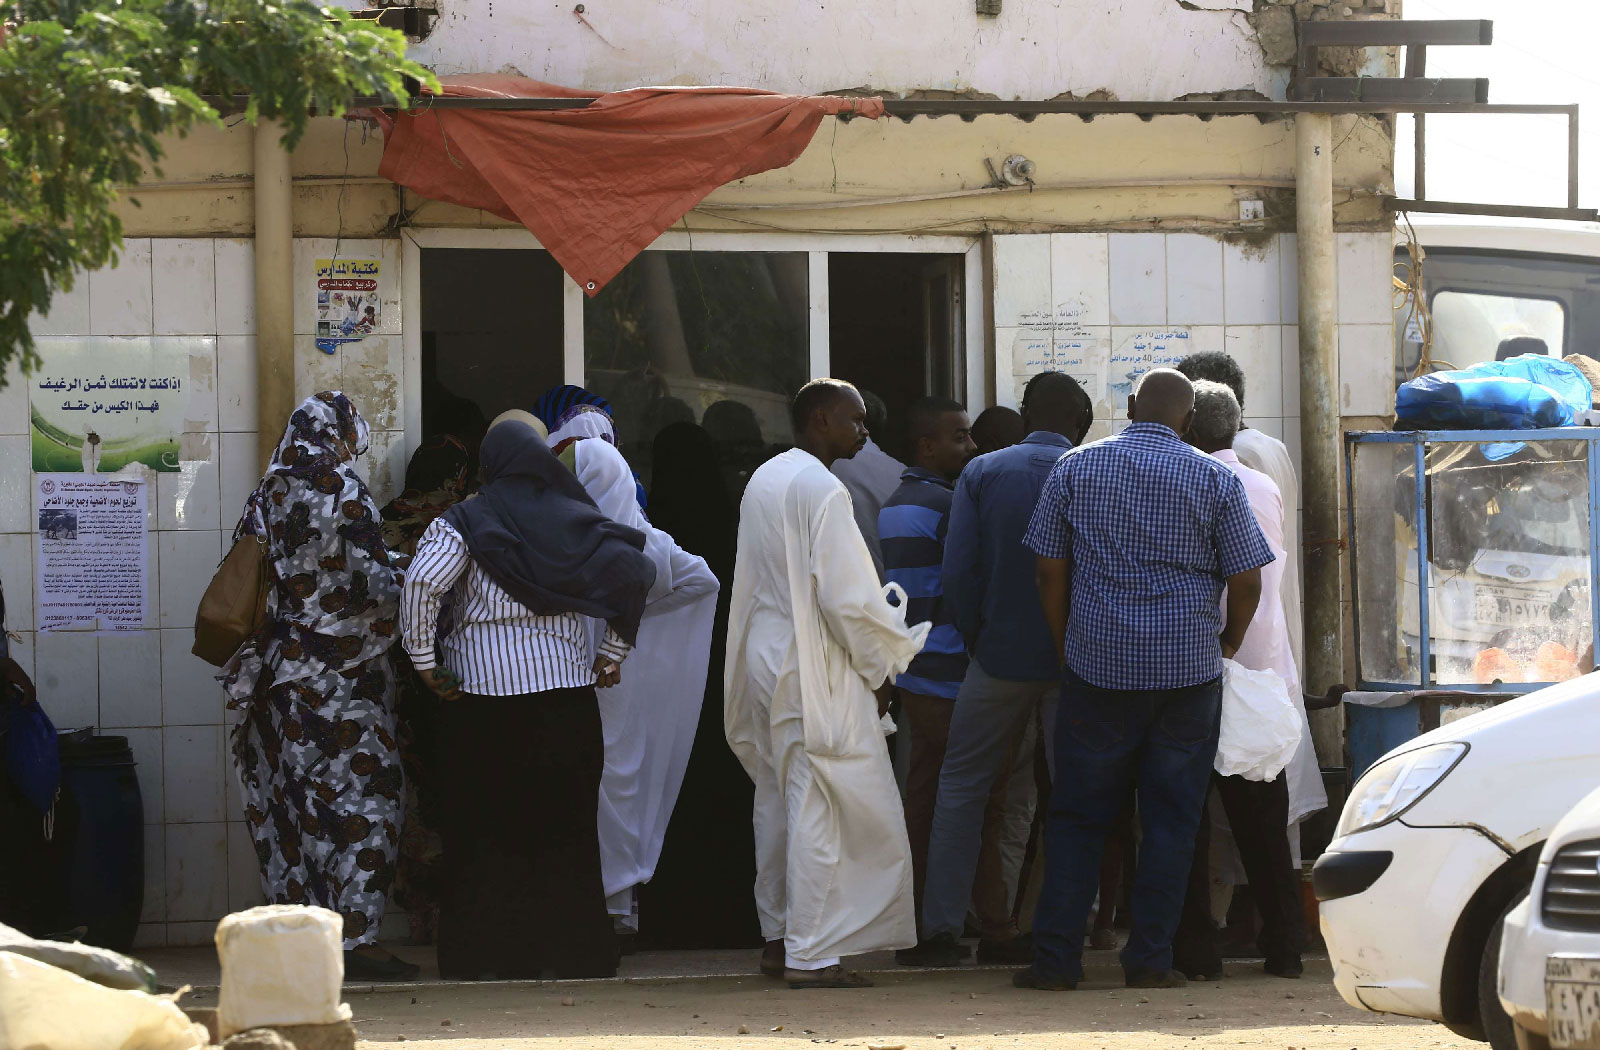 People queue in front of a bakery in the Sudanese capital Khartoum on August 26, 2018.